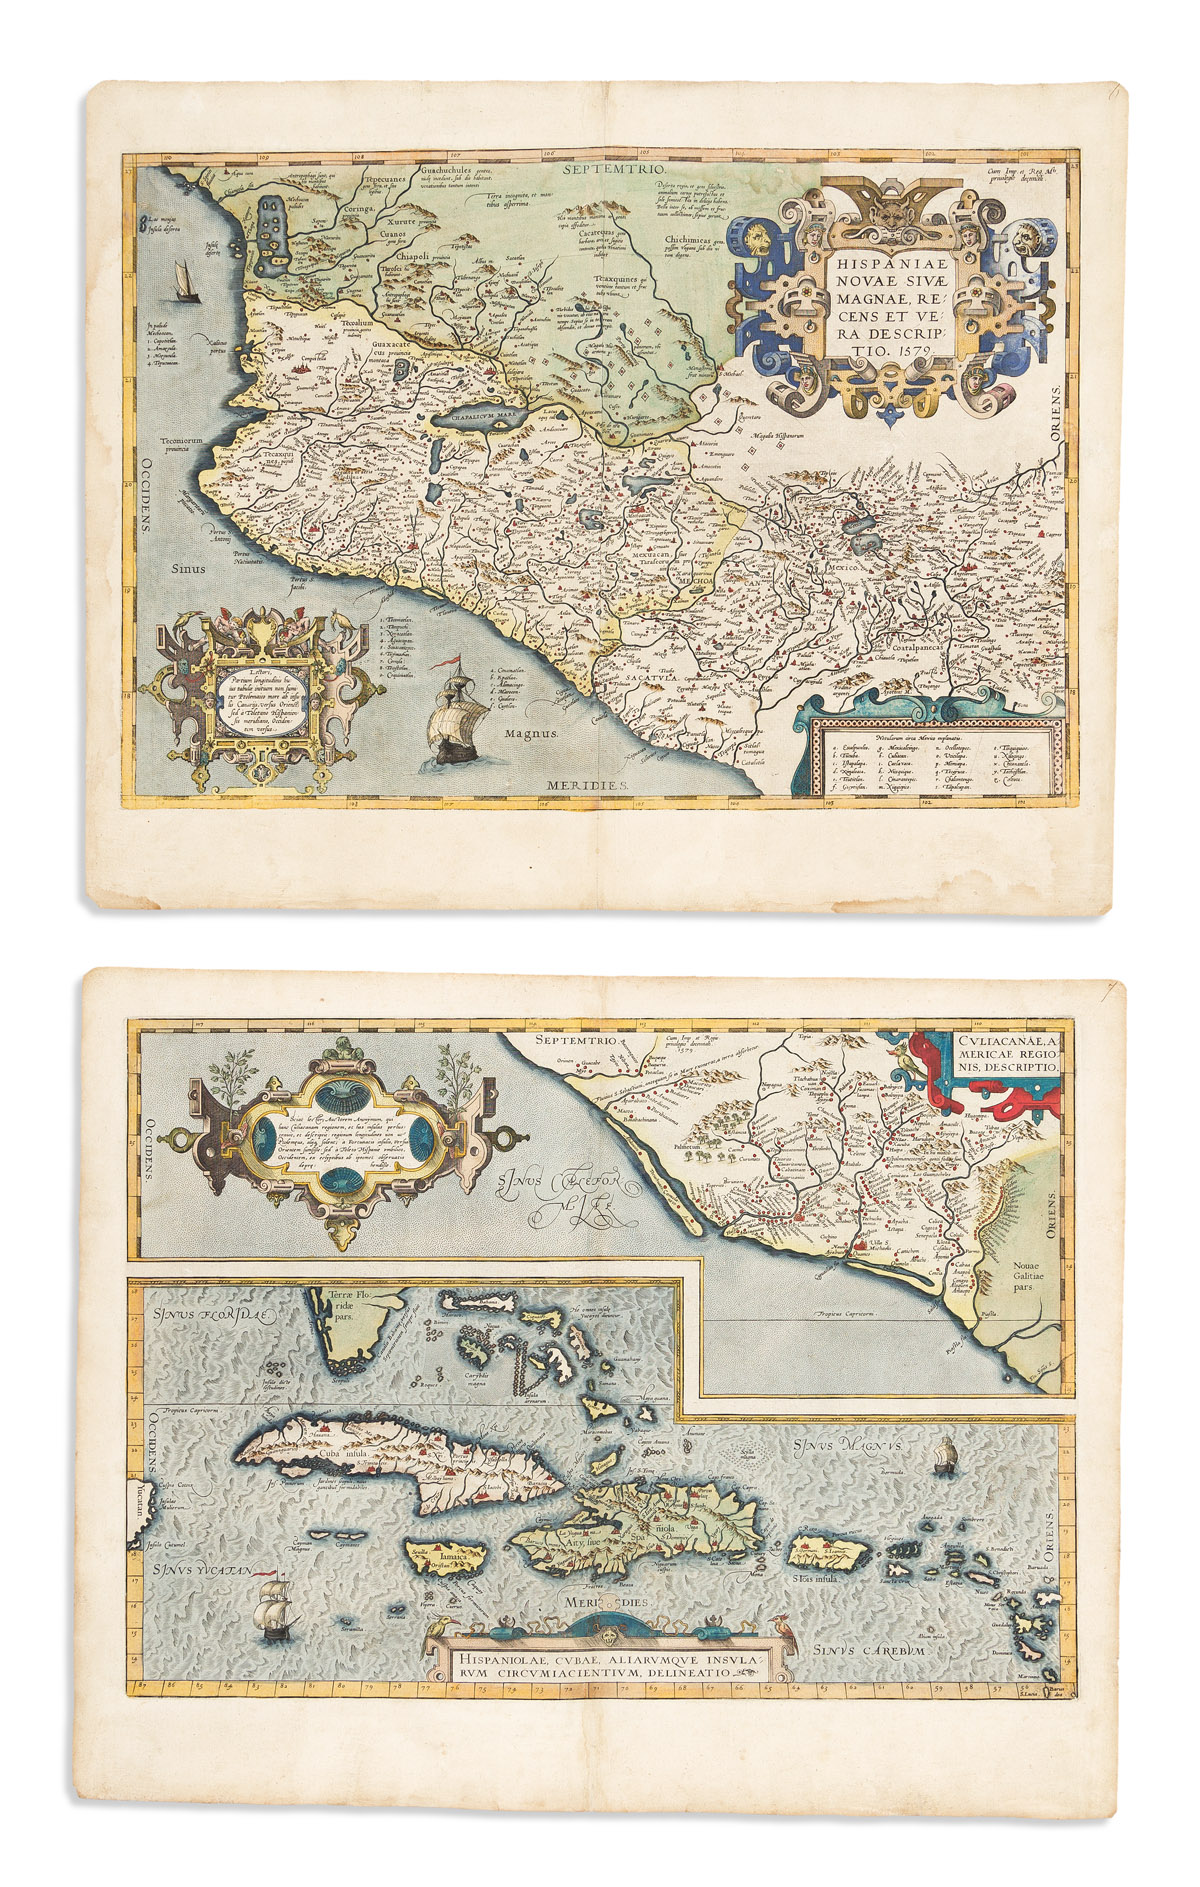 ORTELIUS, ABRAHAM. Two double-page engraved maps of Mexico and the Caribbean.